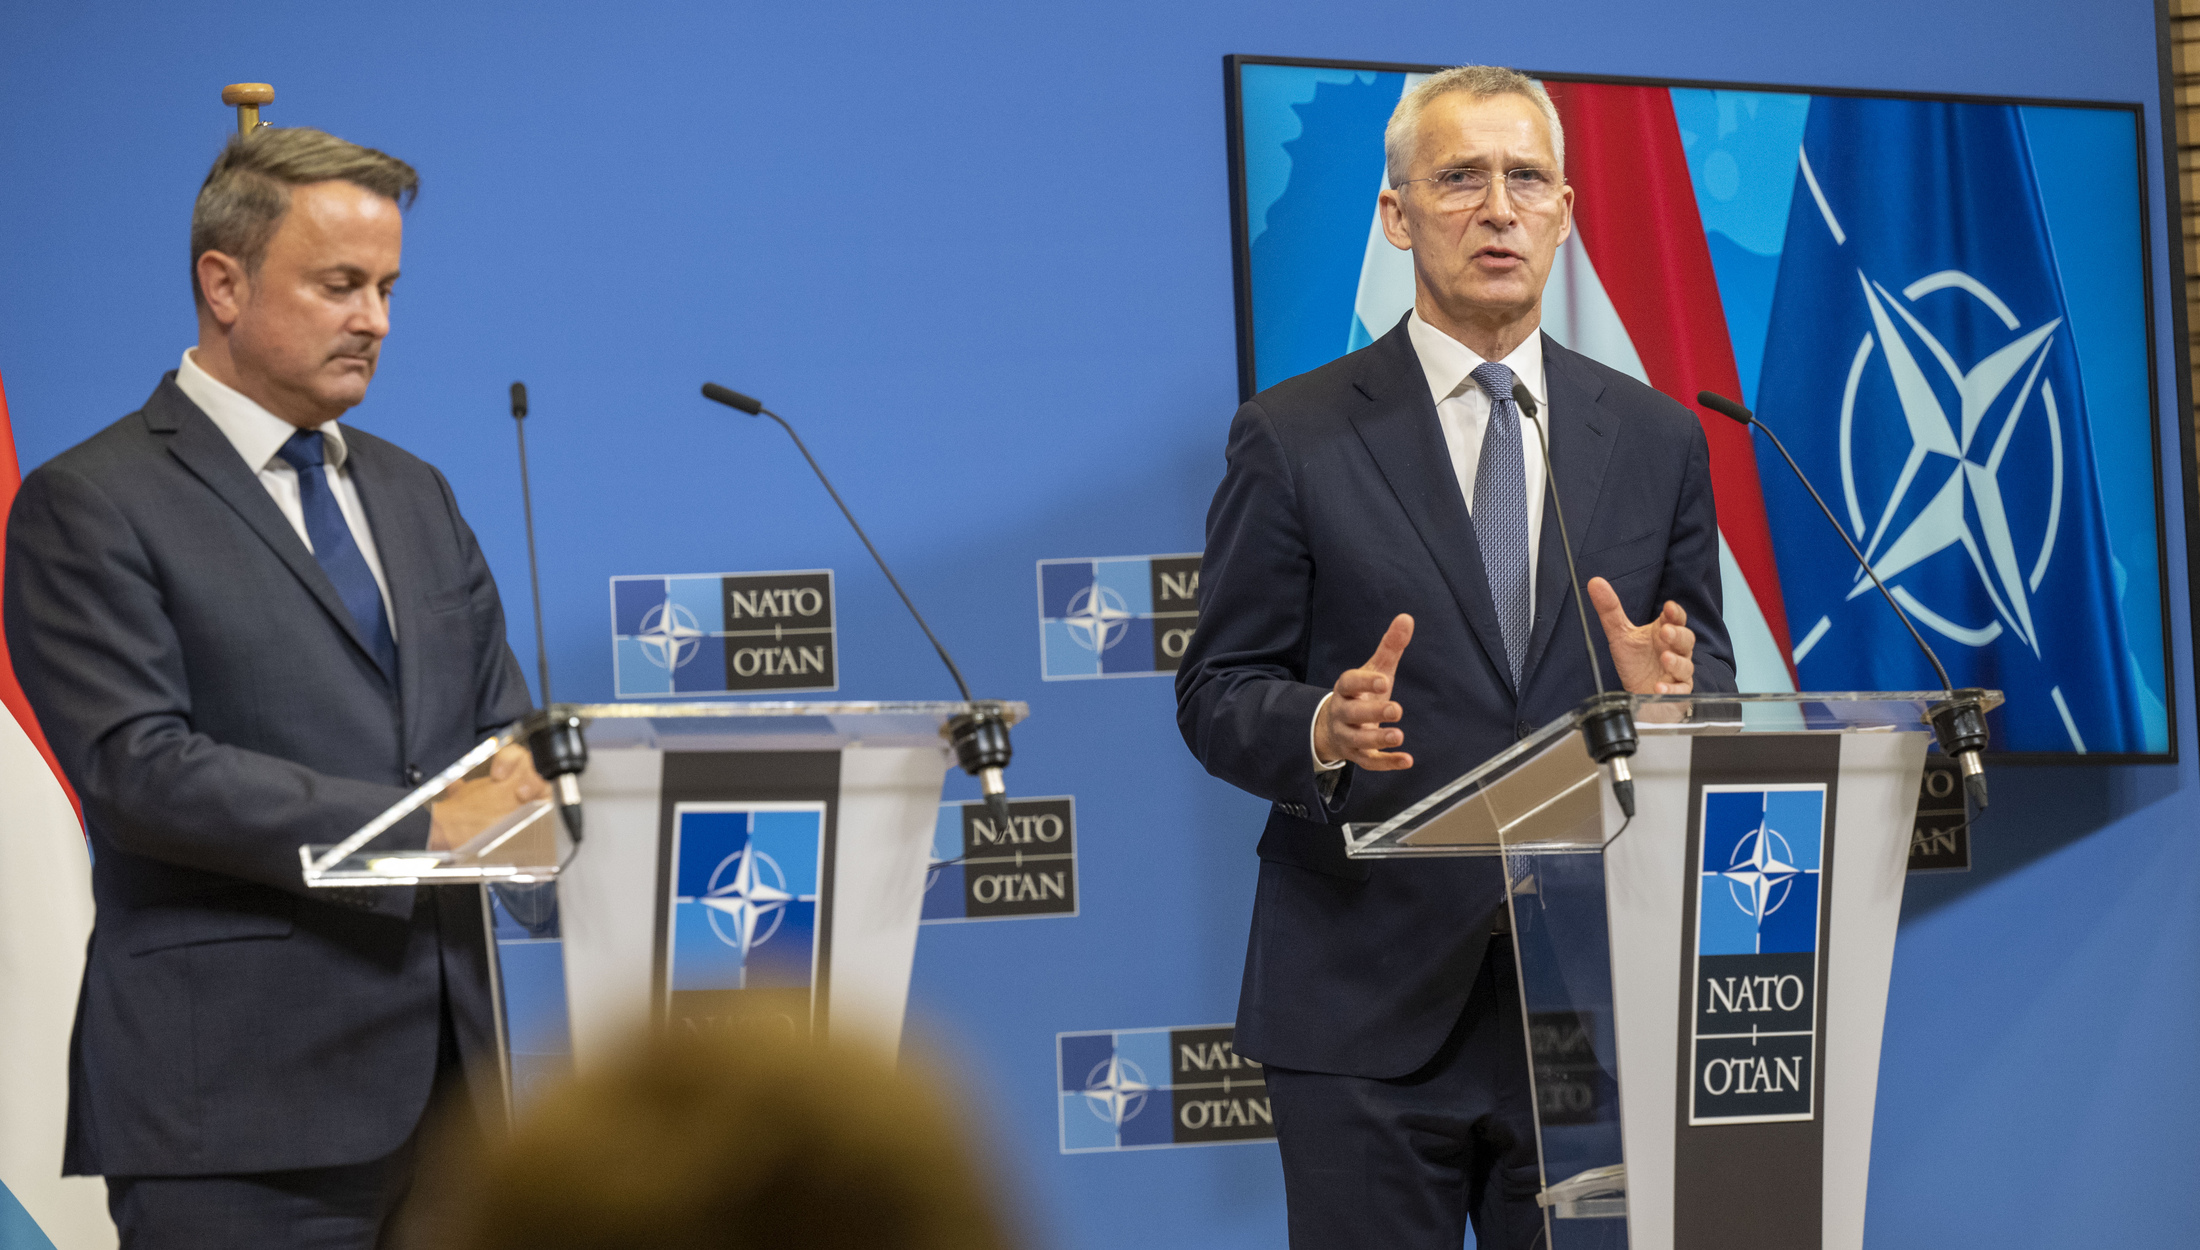 The Prime Minister of Luxembourg visits NATO